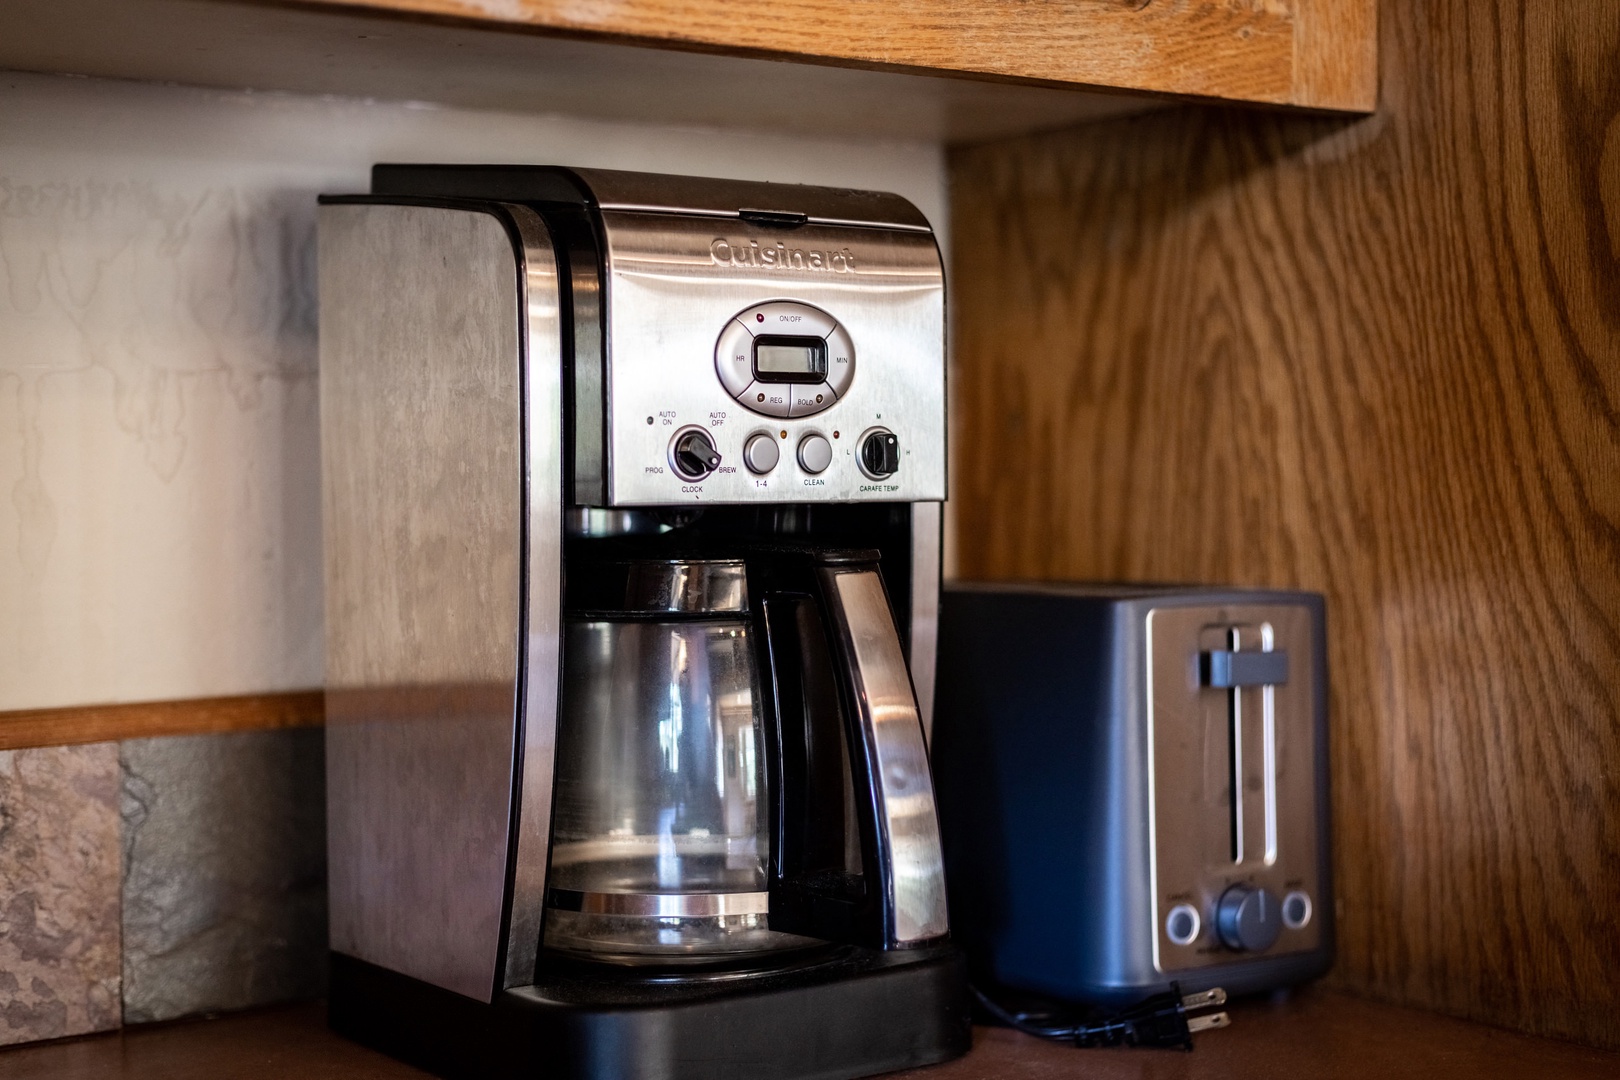 Drip coffee maker and toaster